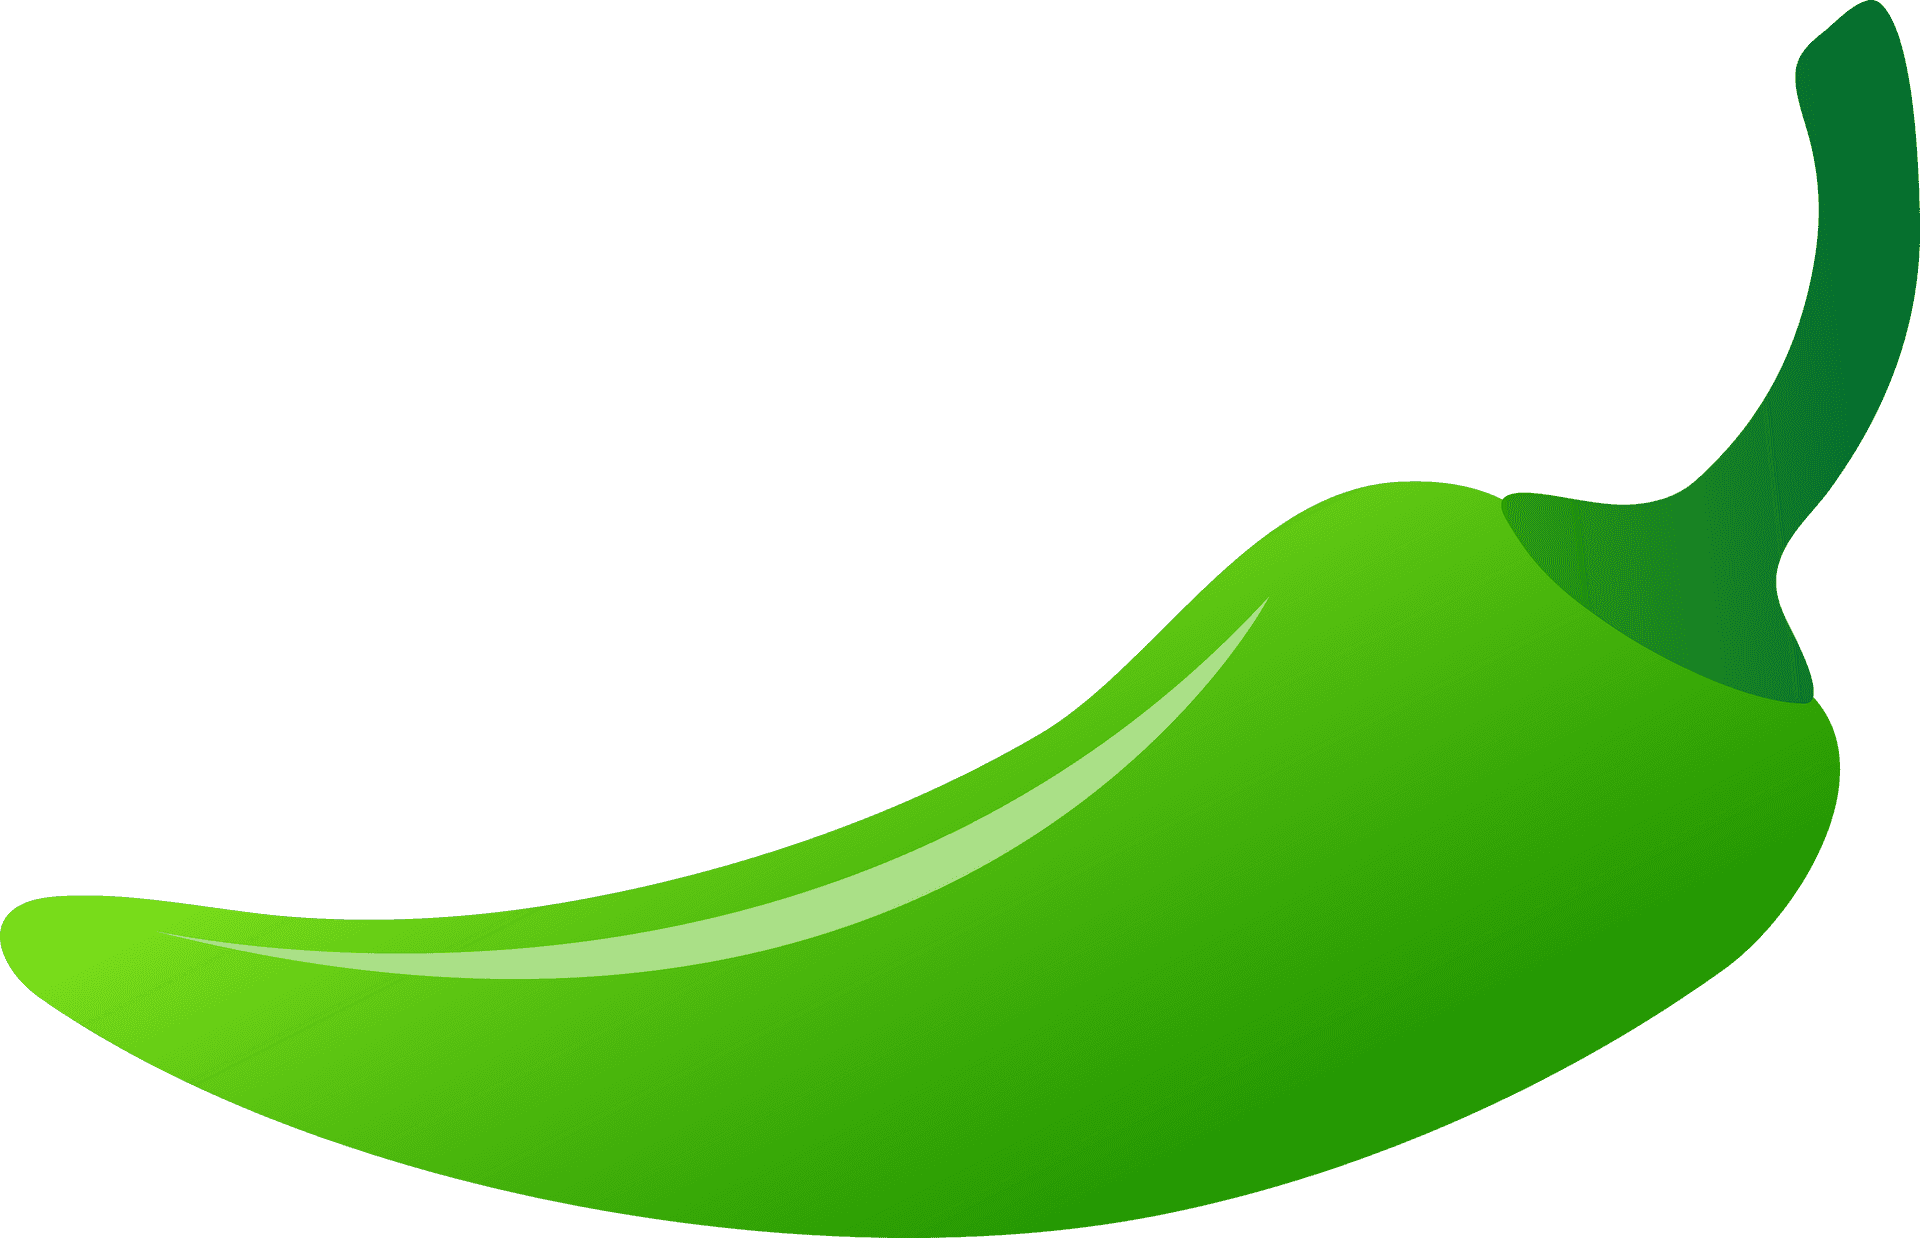 Green Chili Pepper Graphic PNG image